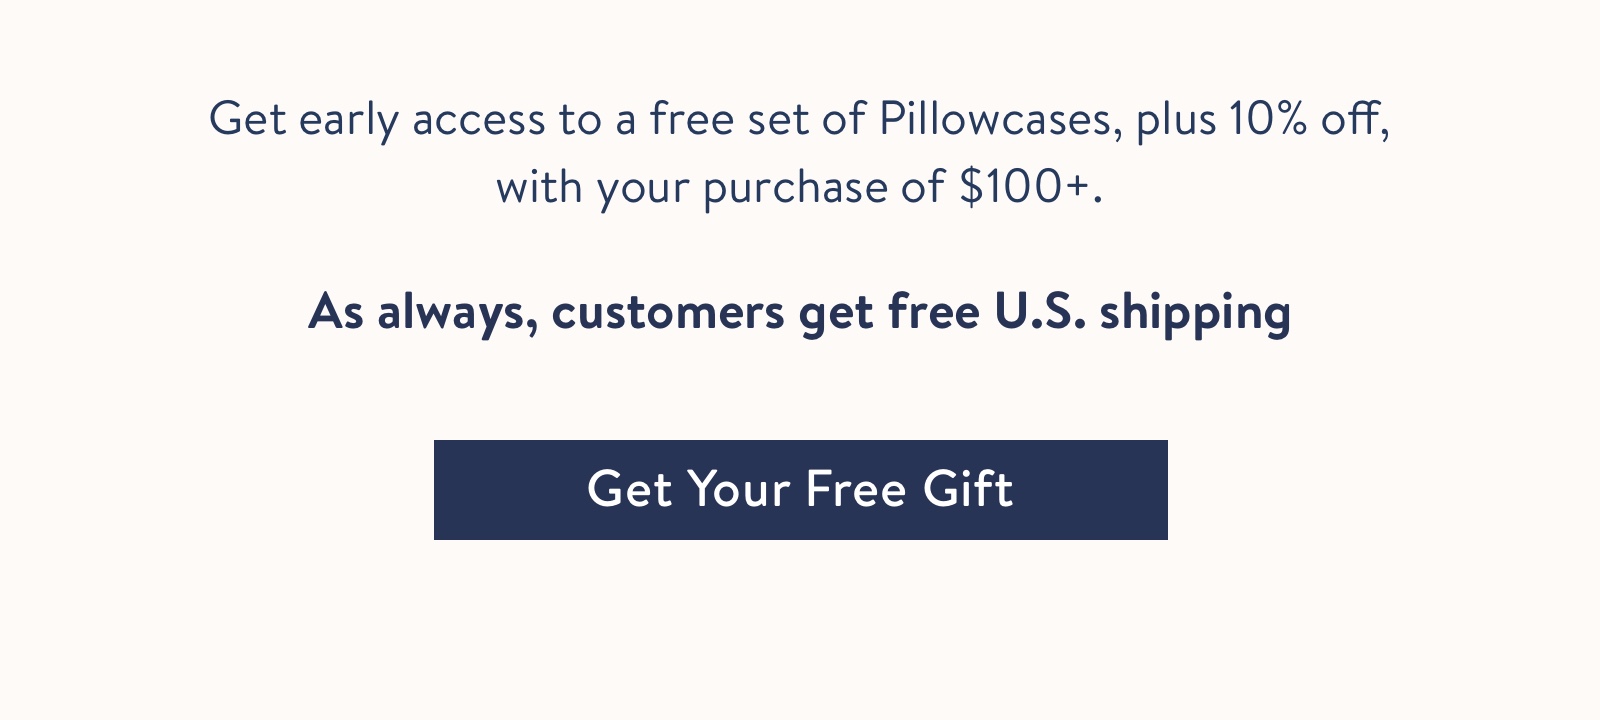 Get early access to a free set of Pillowcases, plus 10% off, ?with your purchase of $100+.